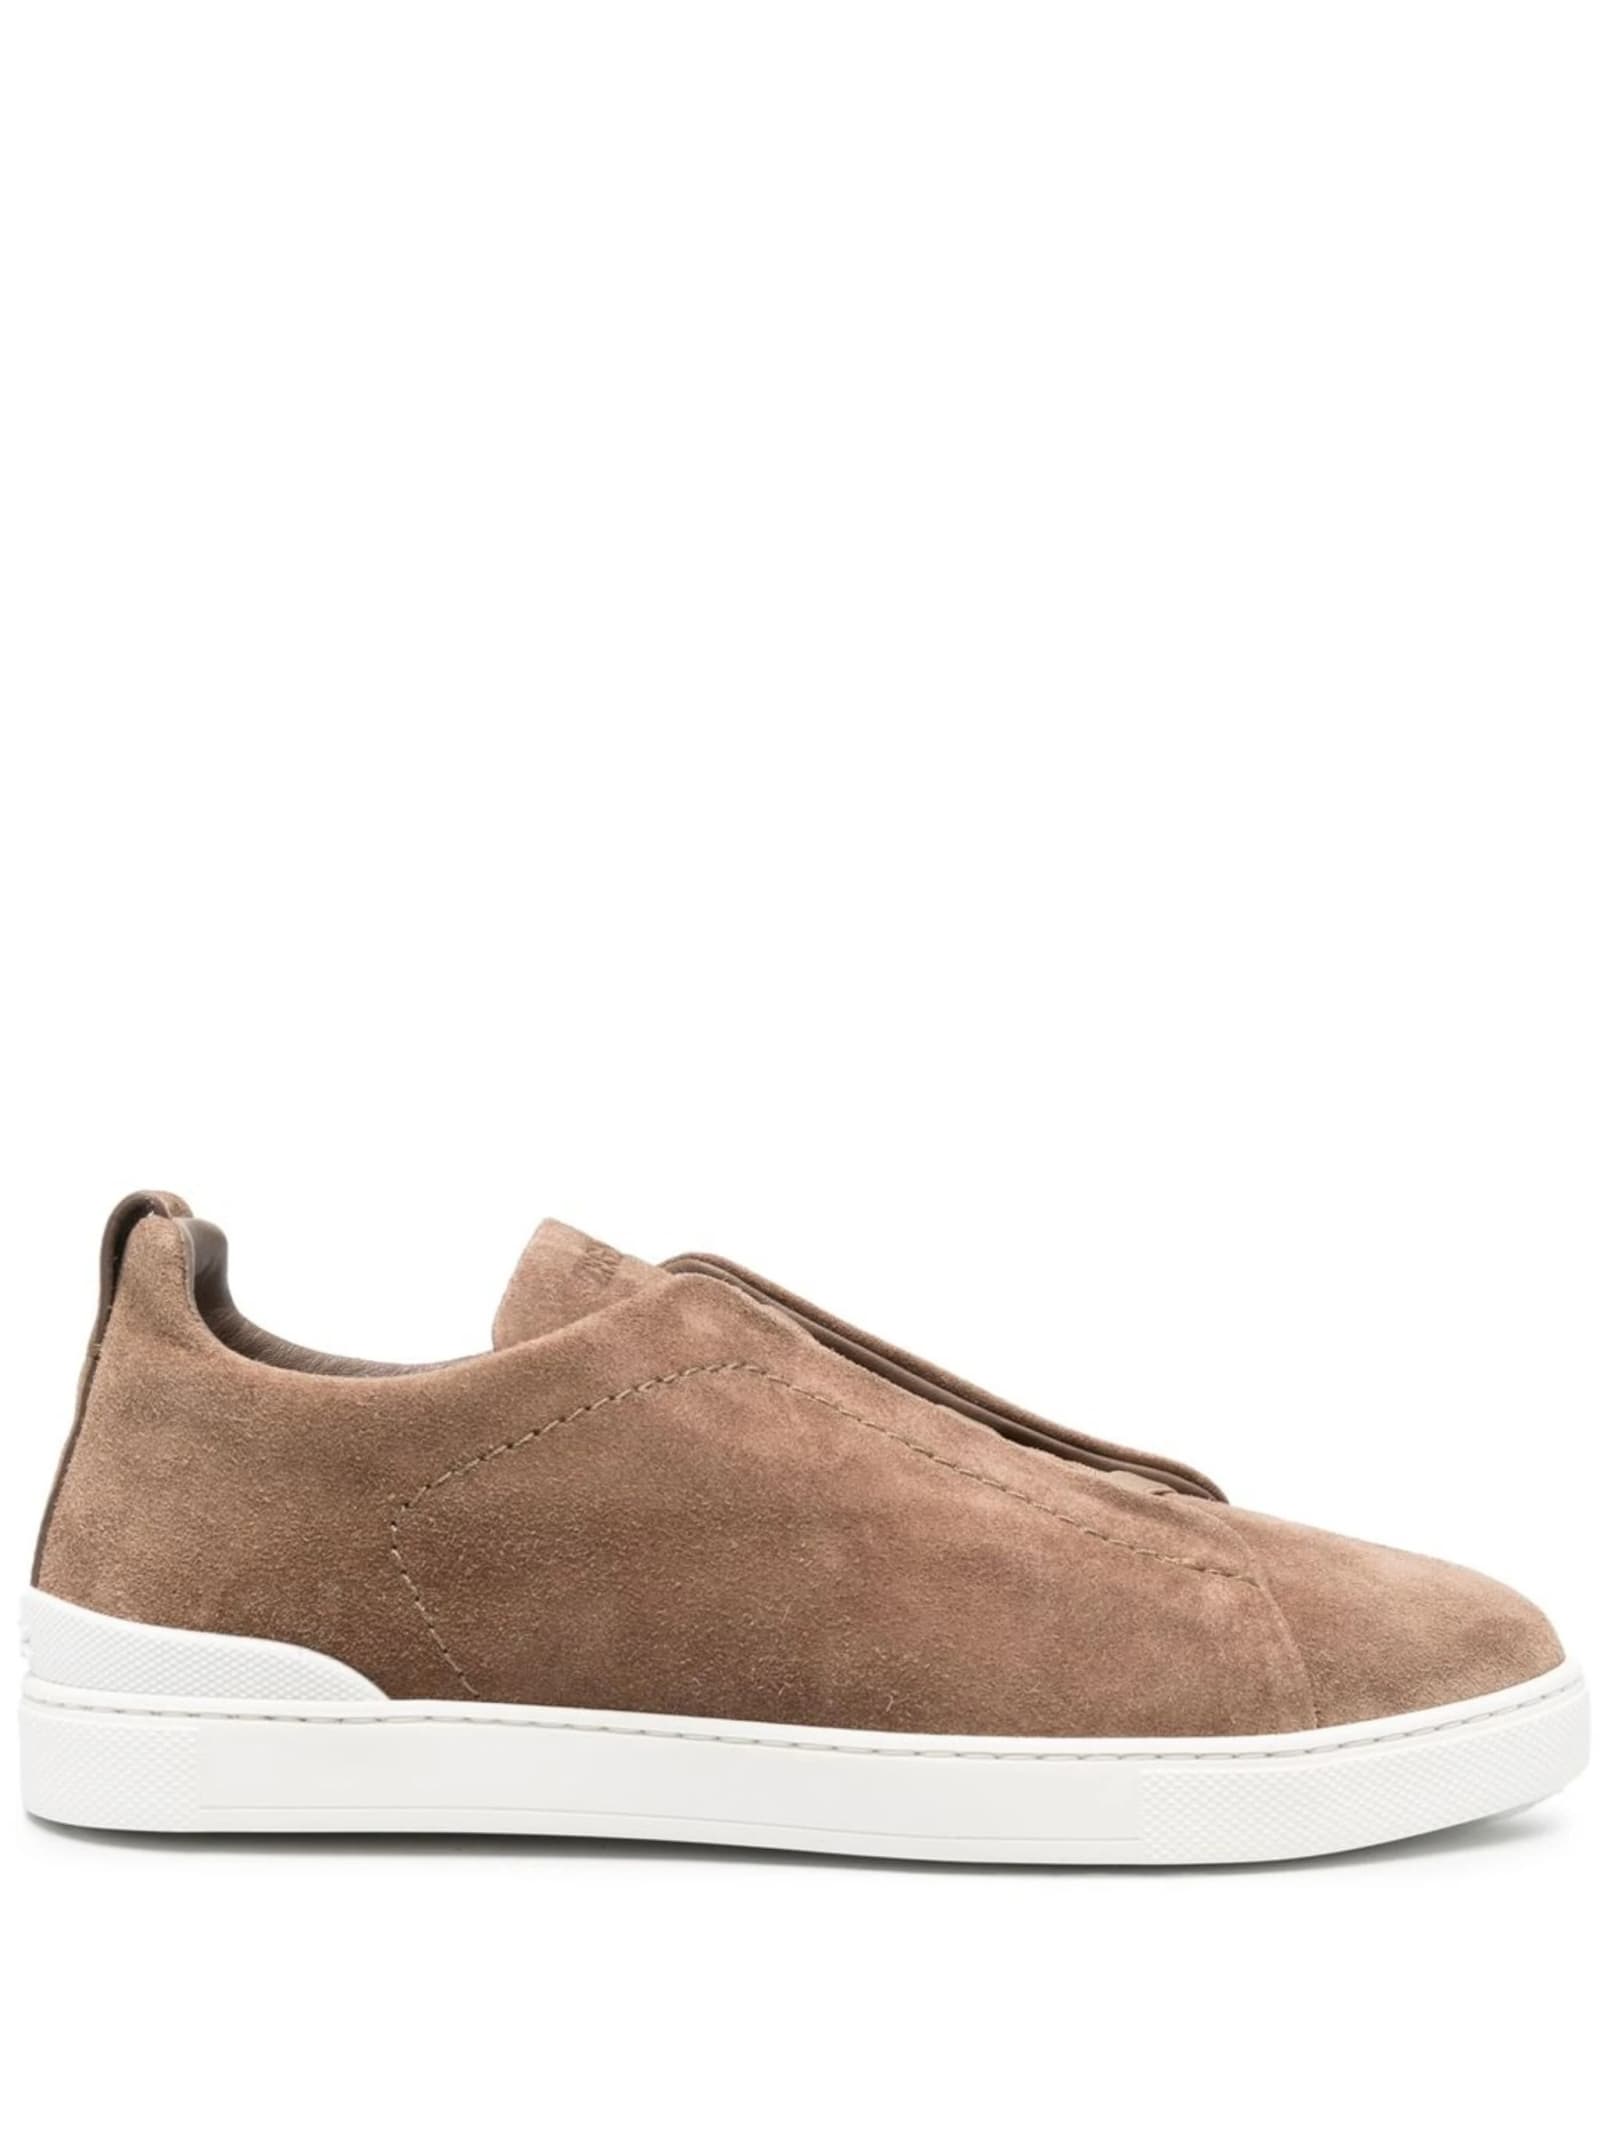 Zegna Triple Stitch Sneakers In Light Brown Suede